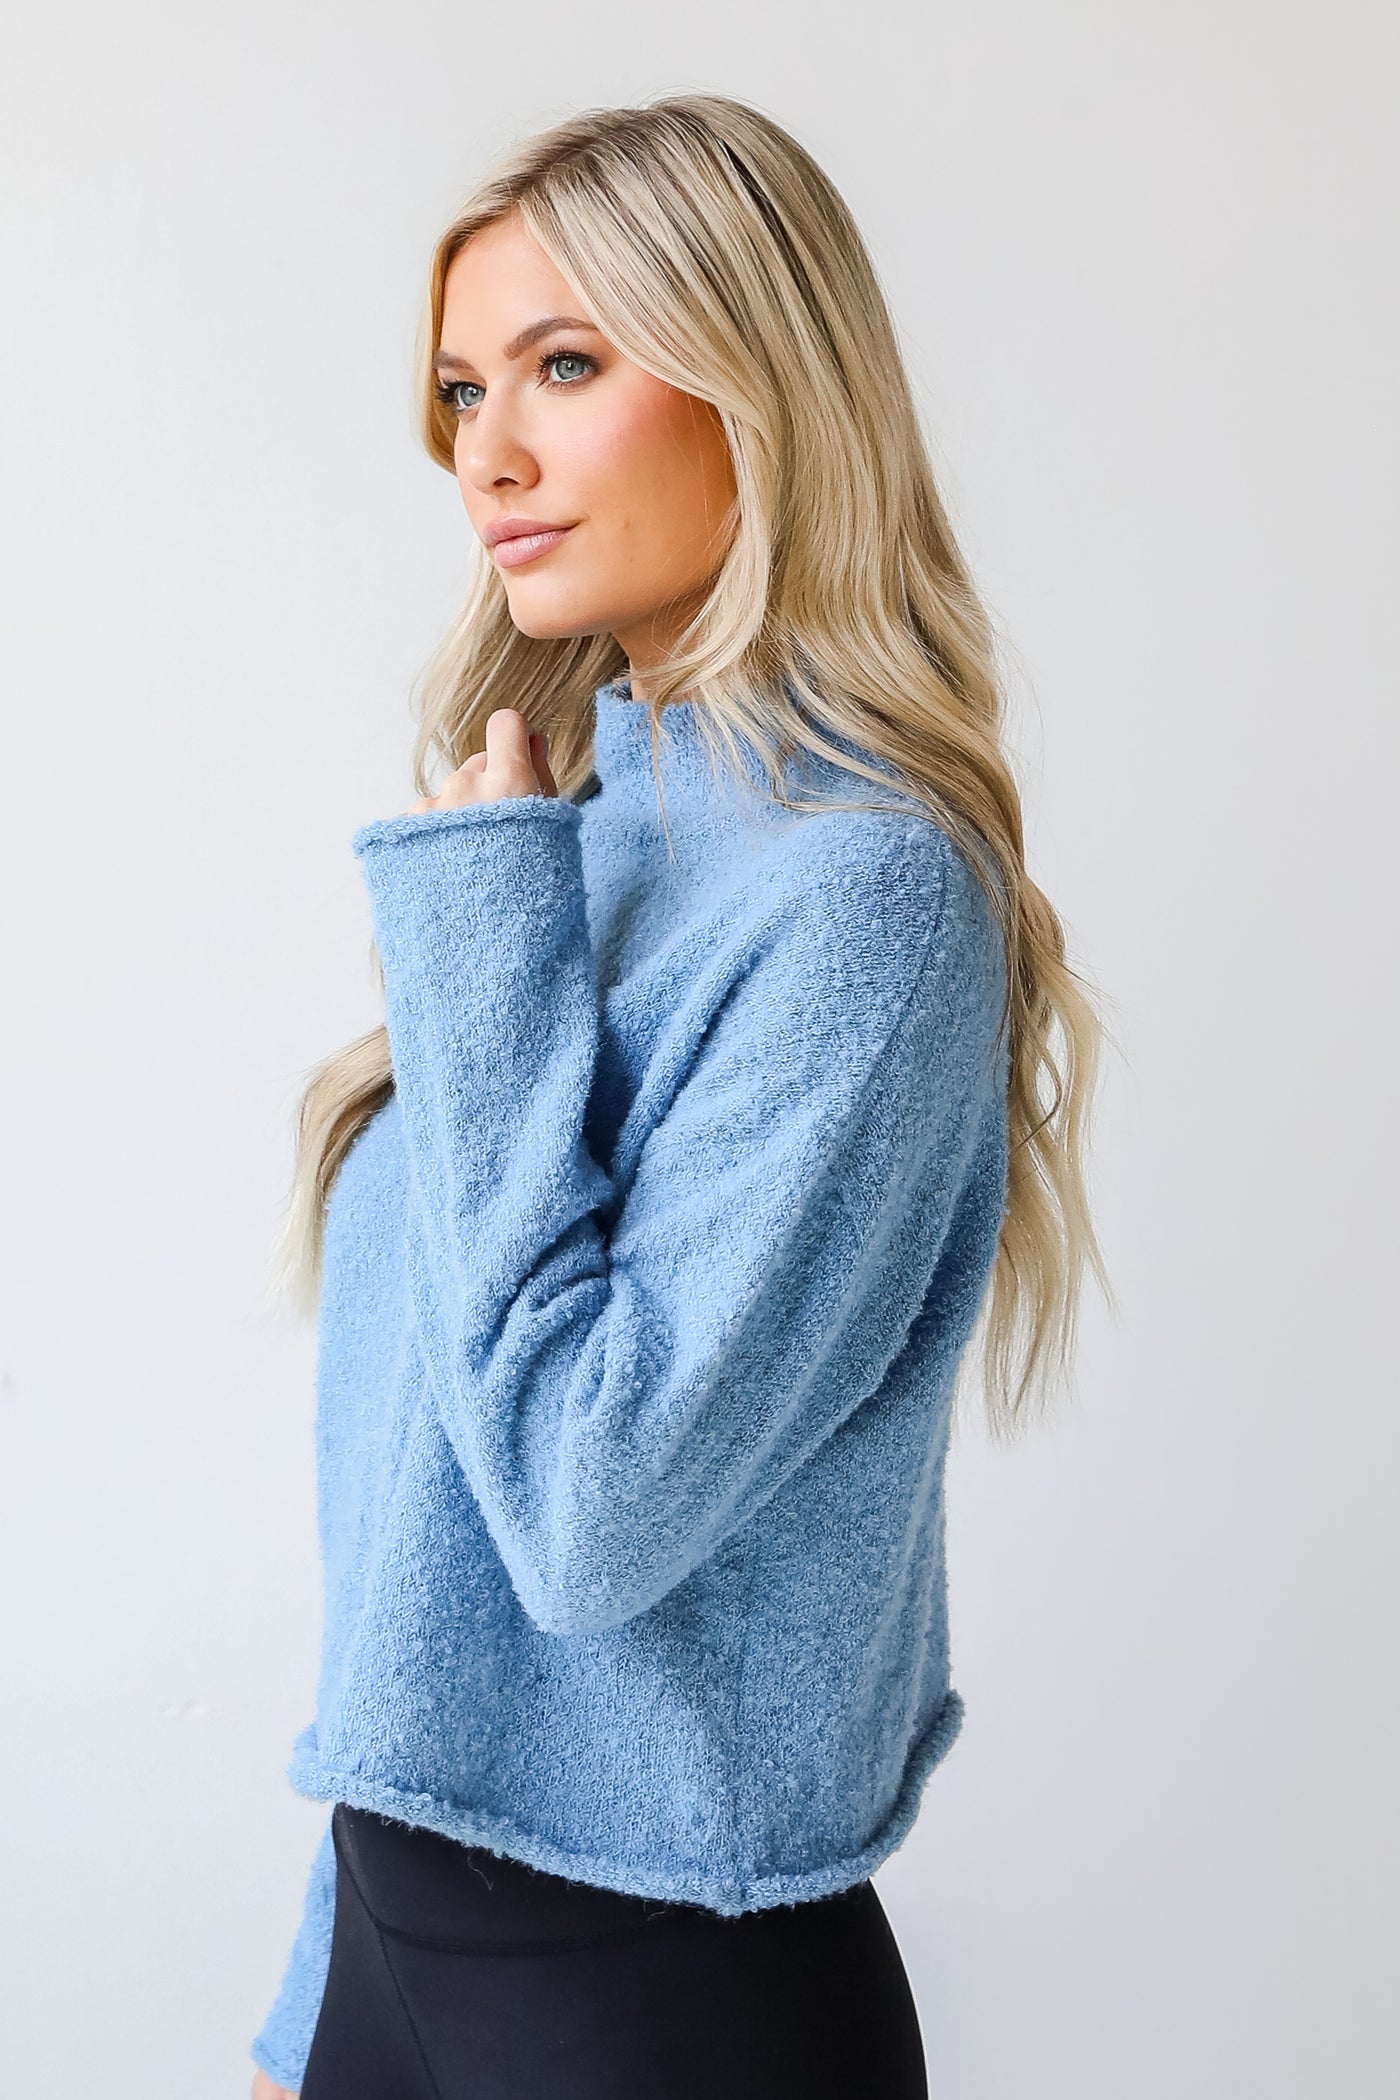 Sweater in blue side view